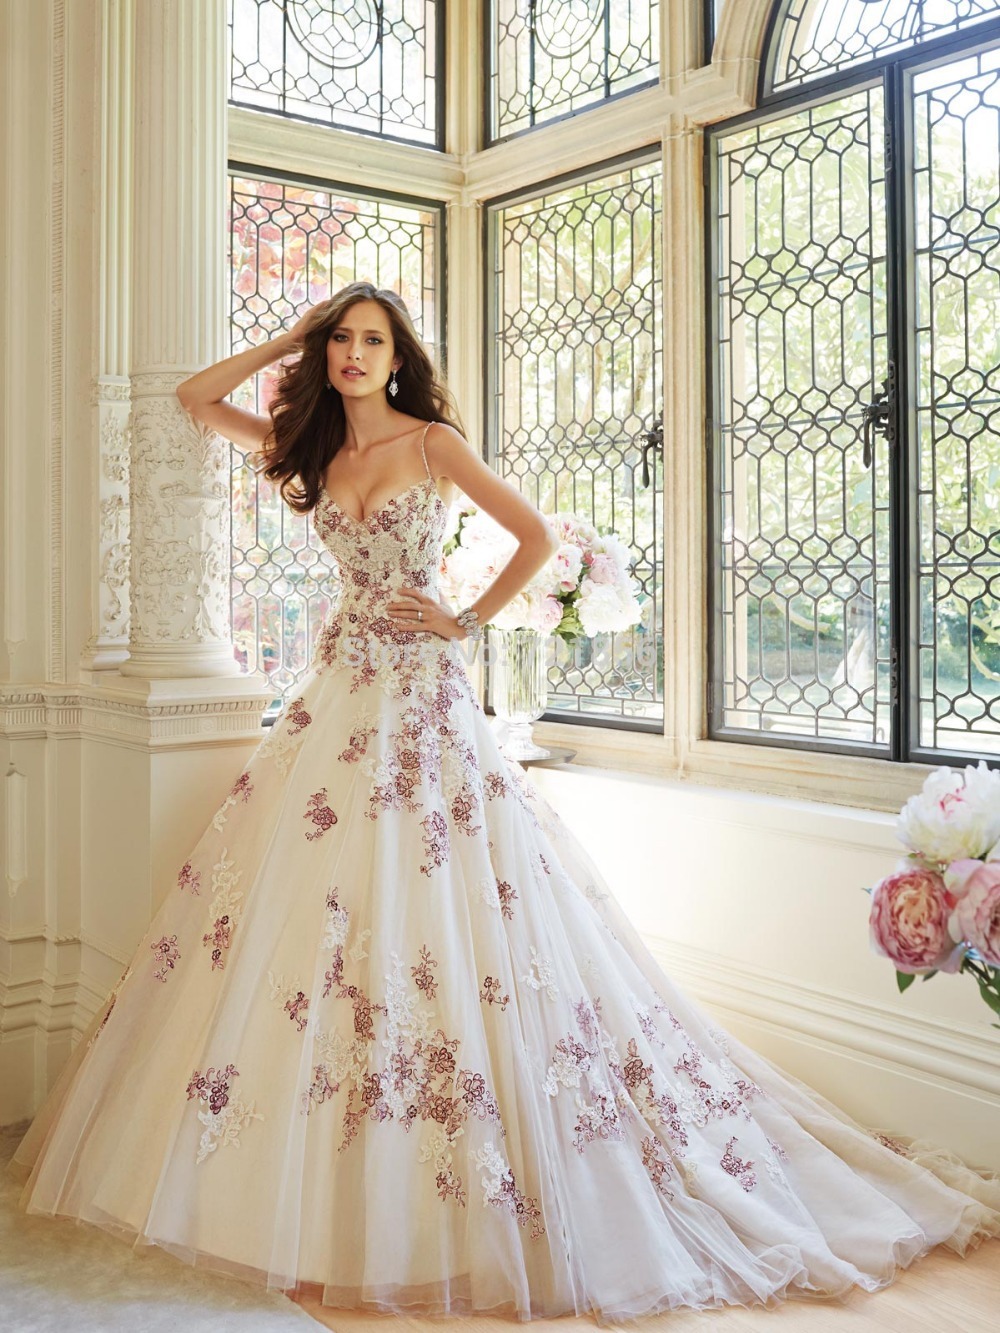 Most Unique Wedding Dresses Top Review - Find the Perfect Venue for ...